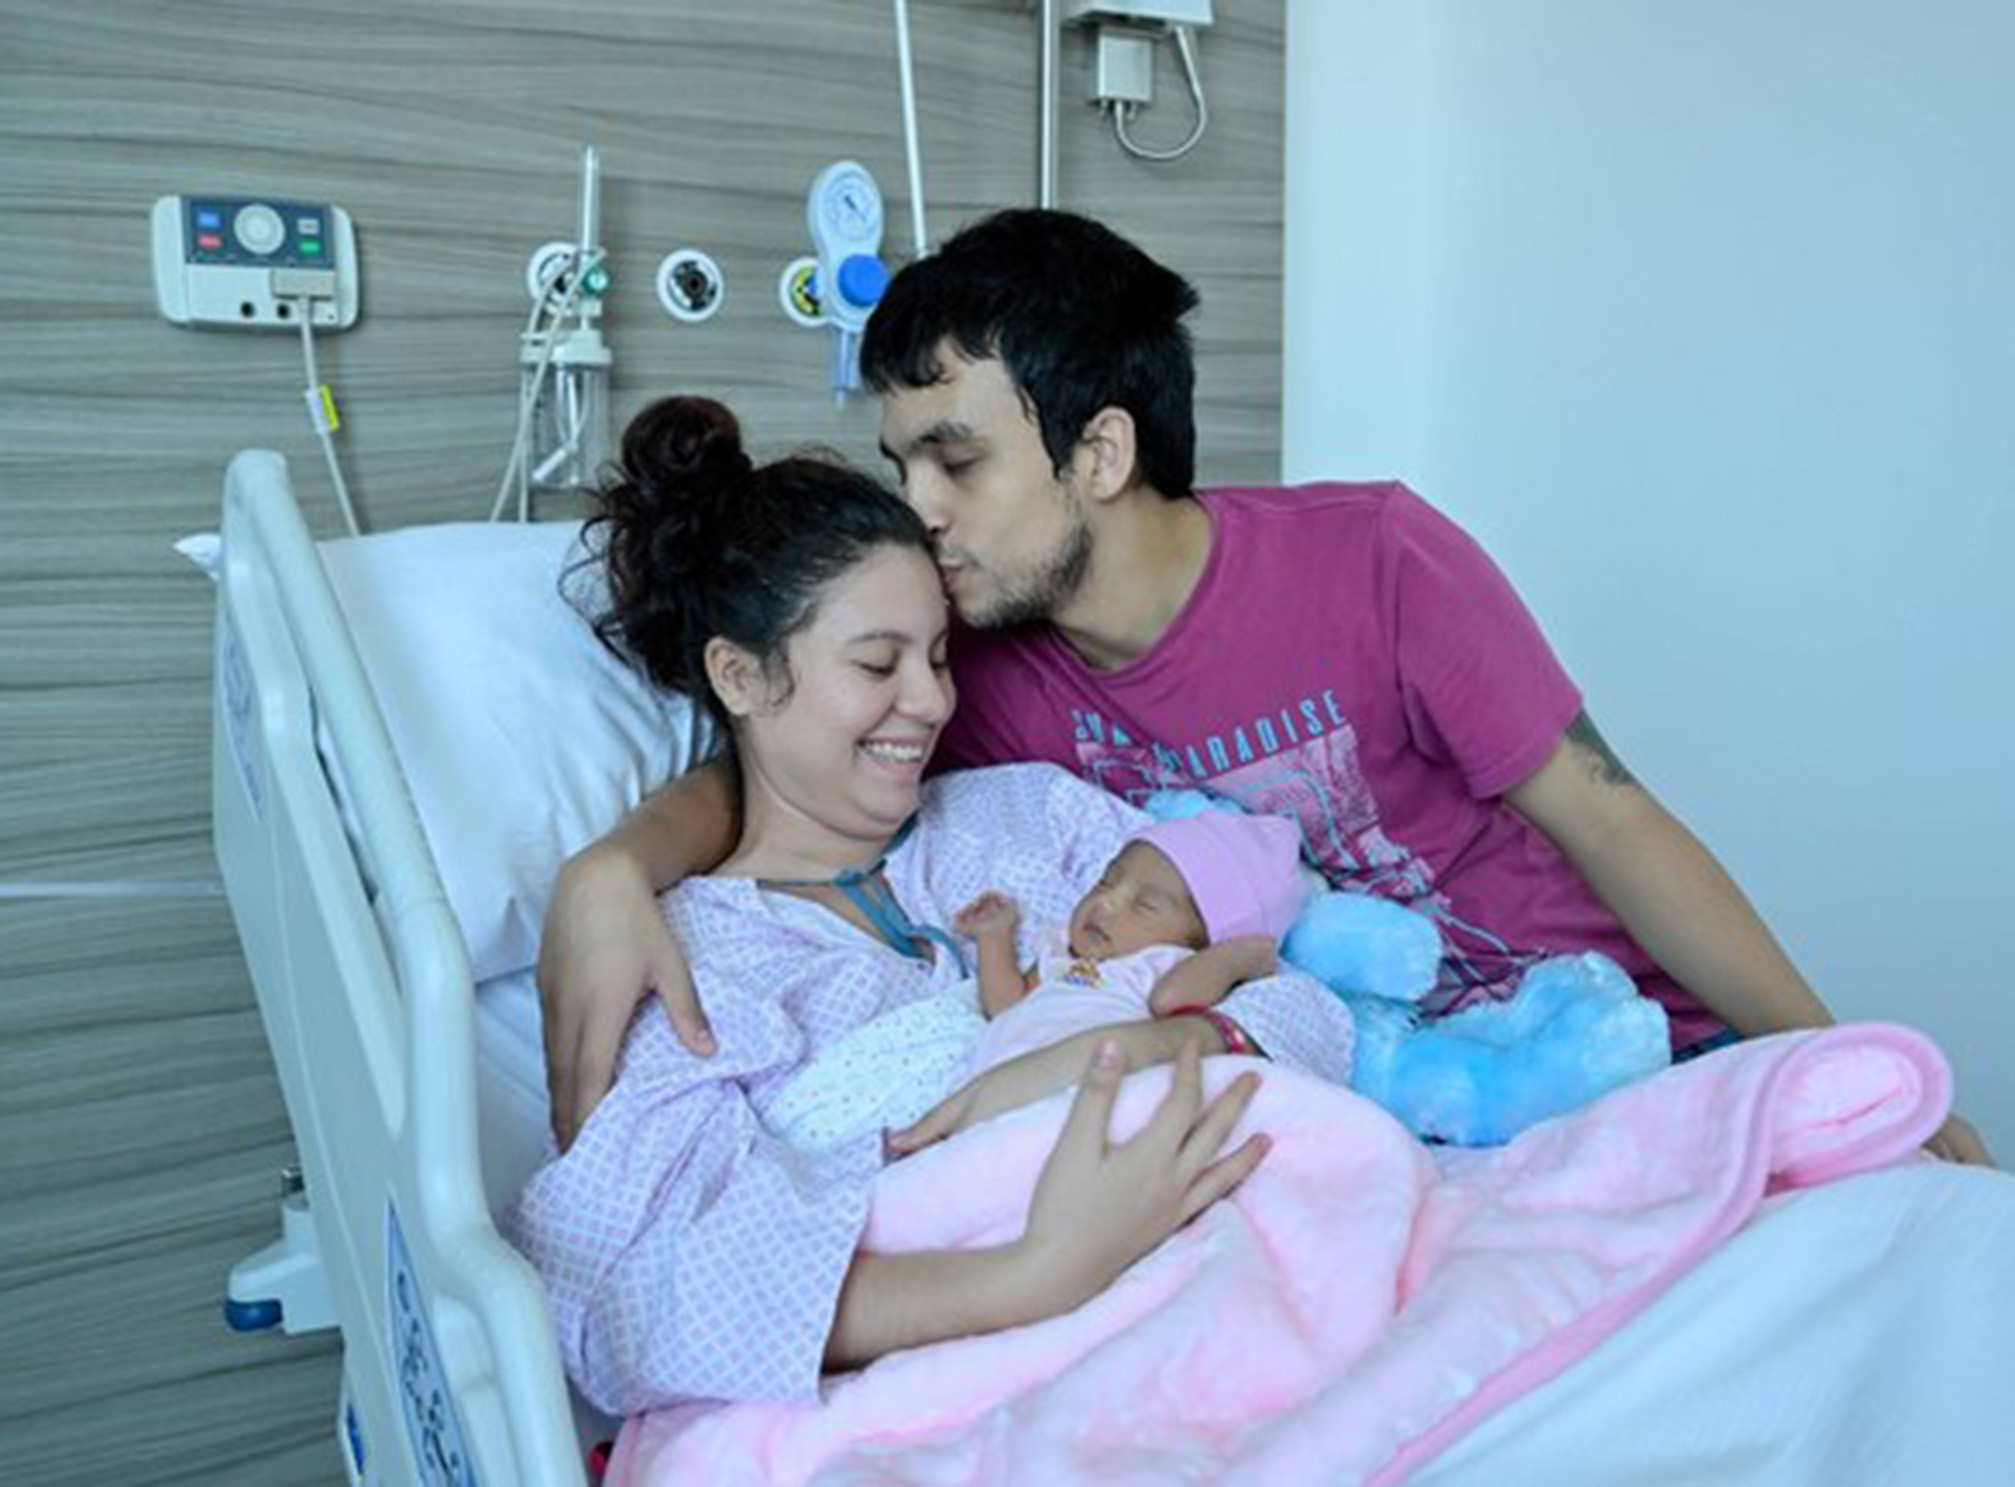 Abu Dhabi doctors deliver baby with spina bifida after first spinal correction surgery